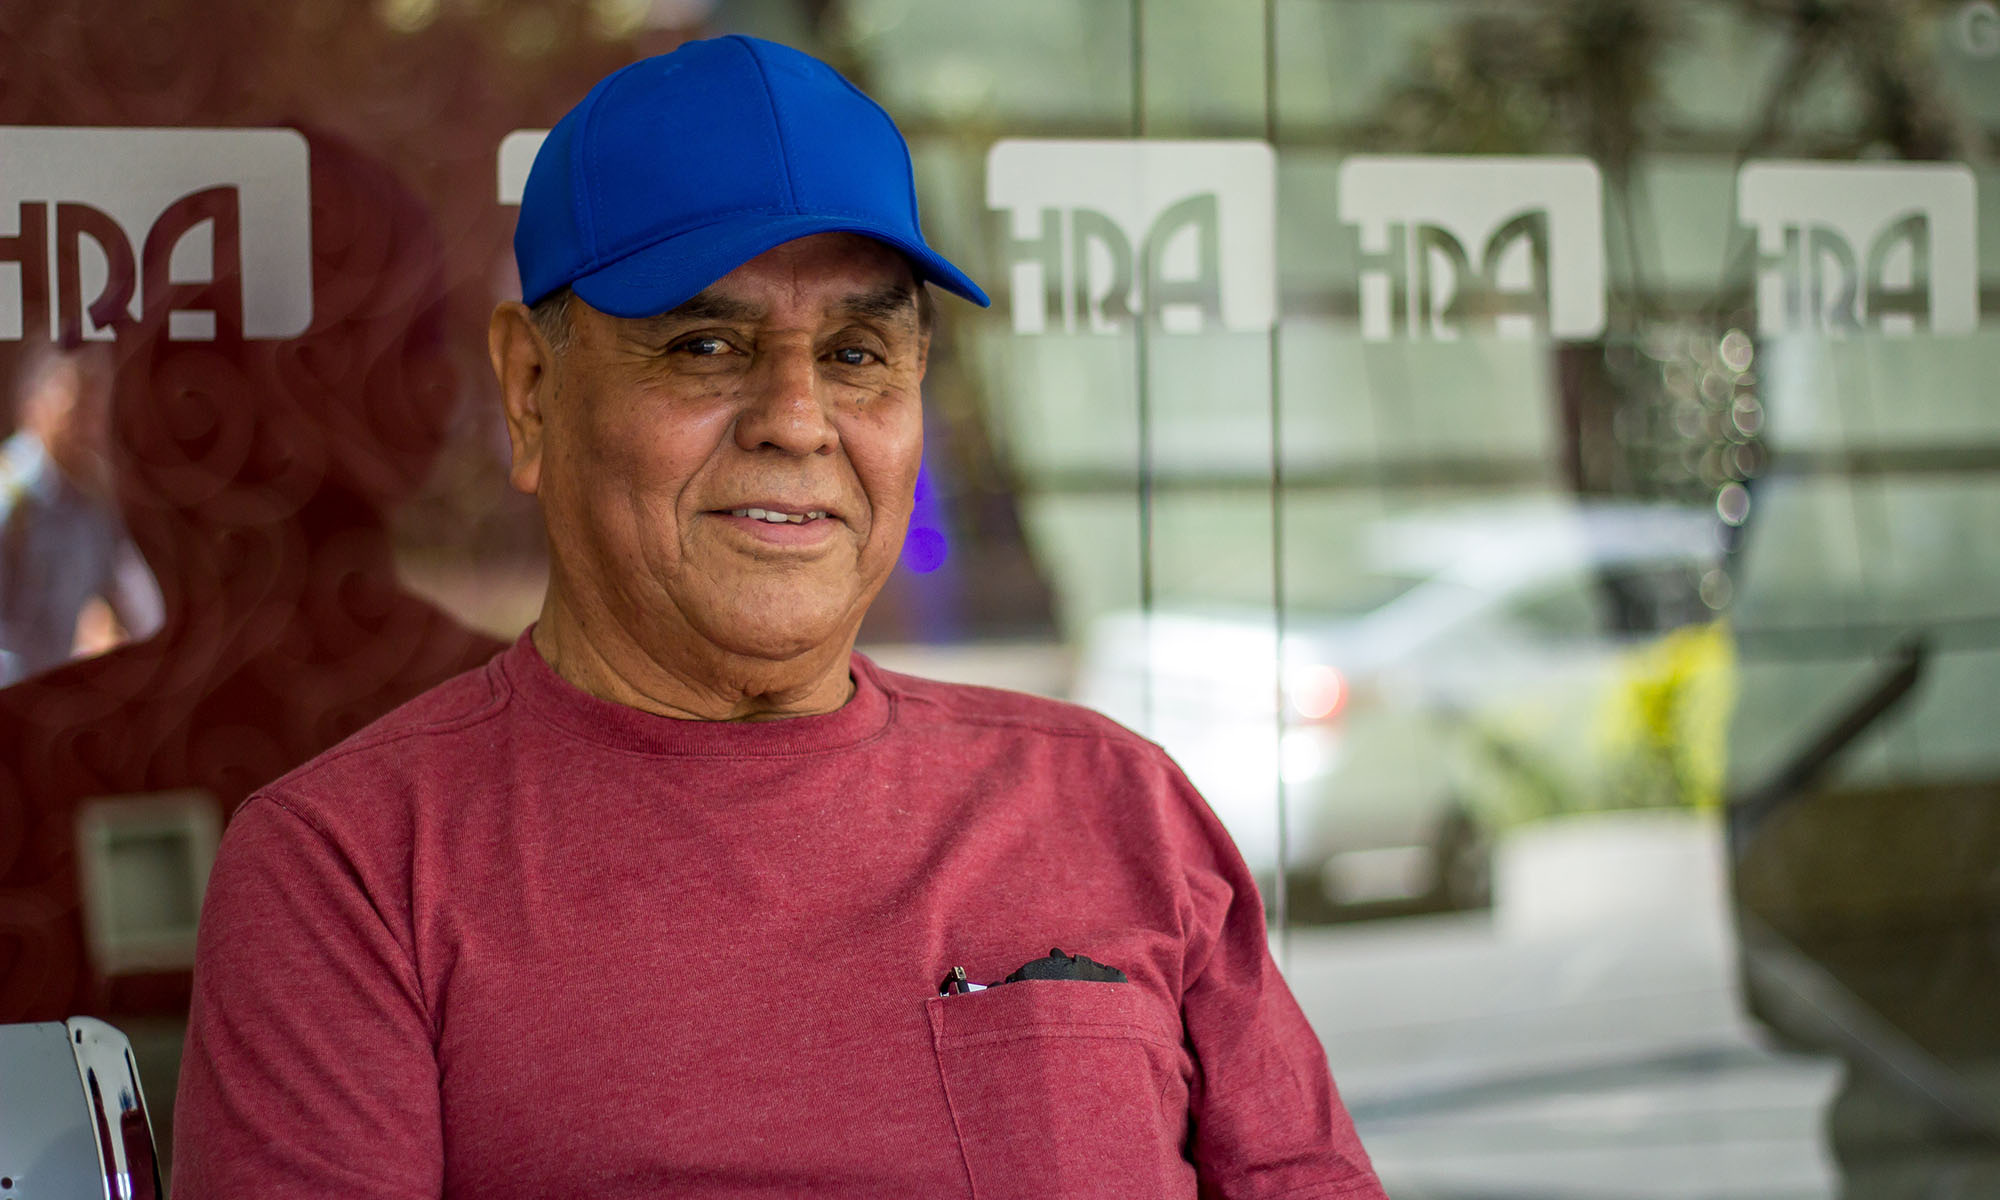 Xavier Solana Rivas sits outside Hotel Real Alameda in Santiago de Querétaro, where he’s staying for his 50-year reunion of his agricultural professional program. He’s been a cattle farmer for 35 years in Aguascalientes, about 3 hours from Querétaro. He is a passionate opponent of President Trump.